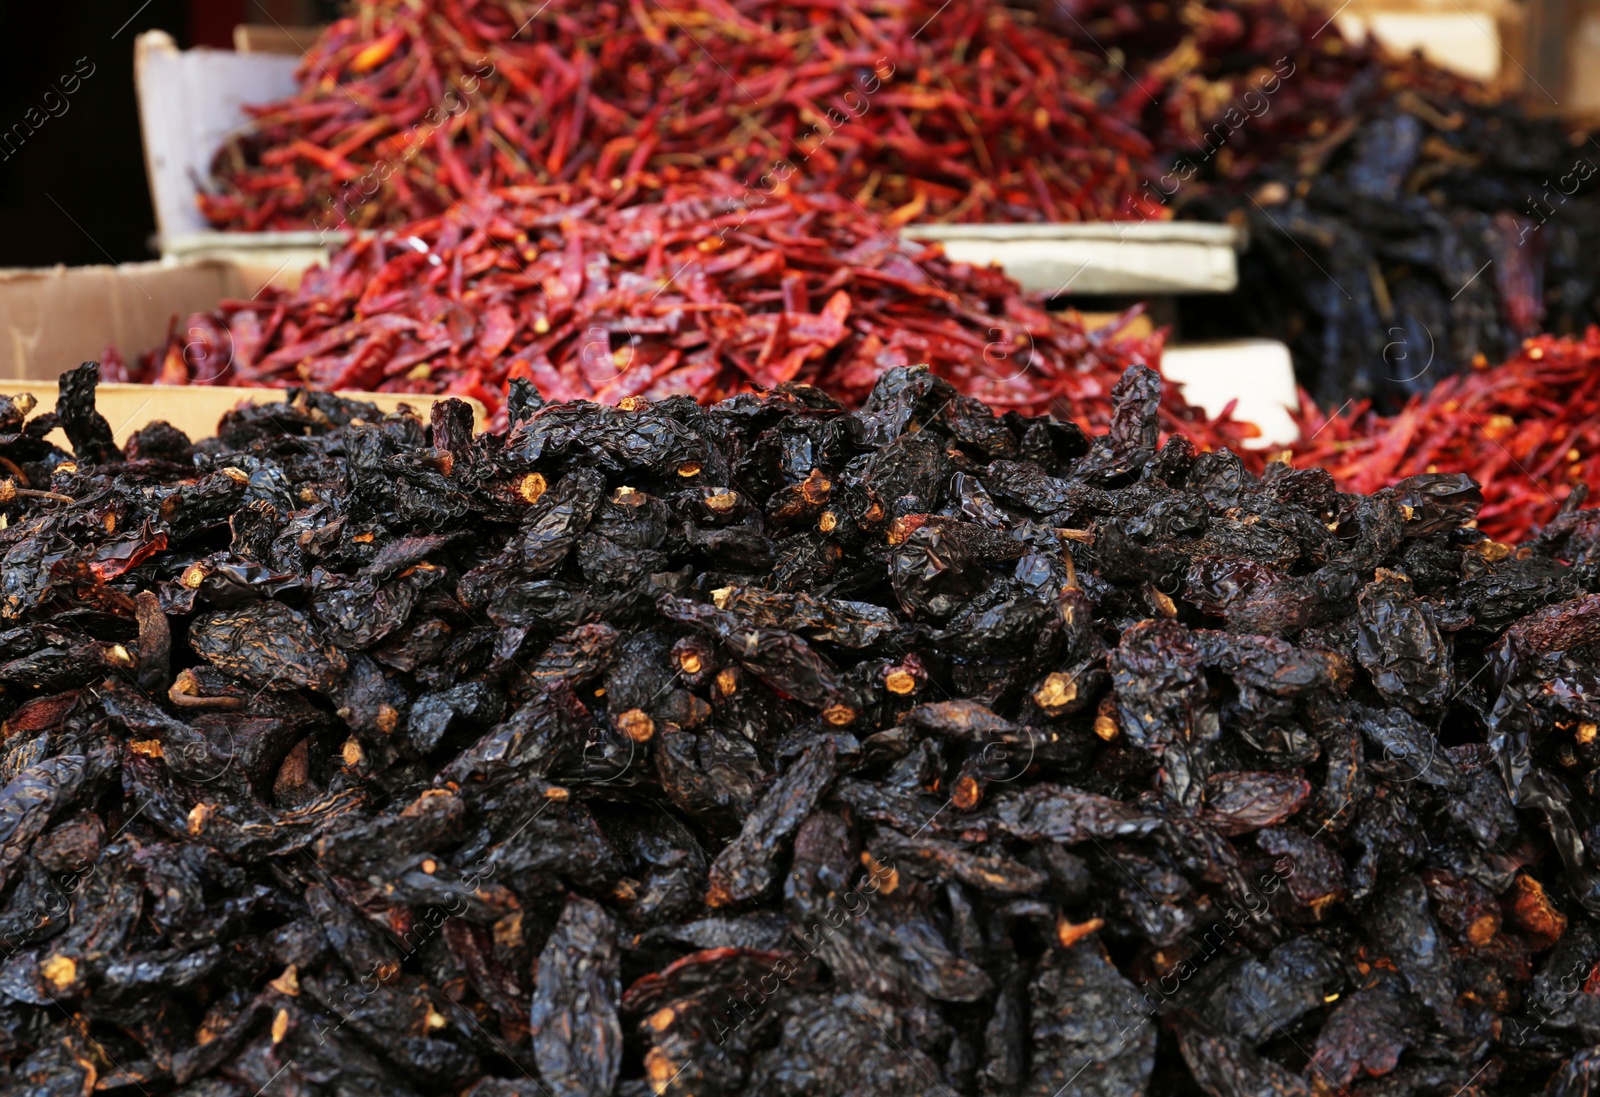 Photo of Heap of dried Ancho chile peppers on counter at market